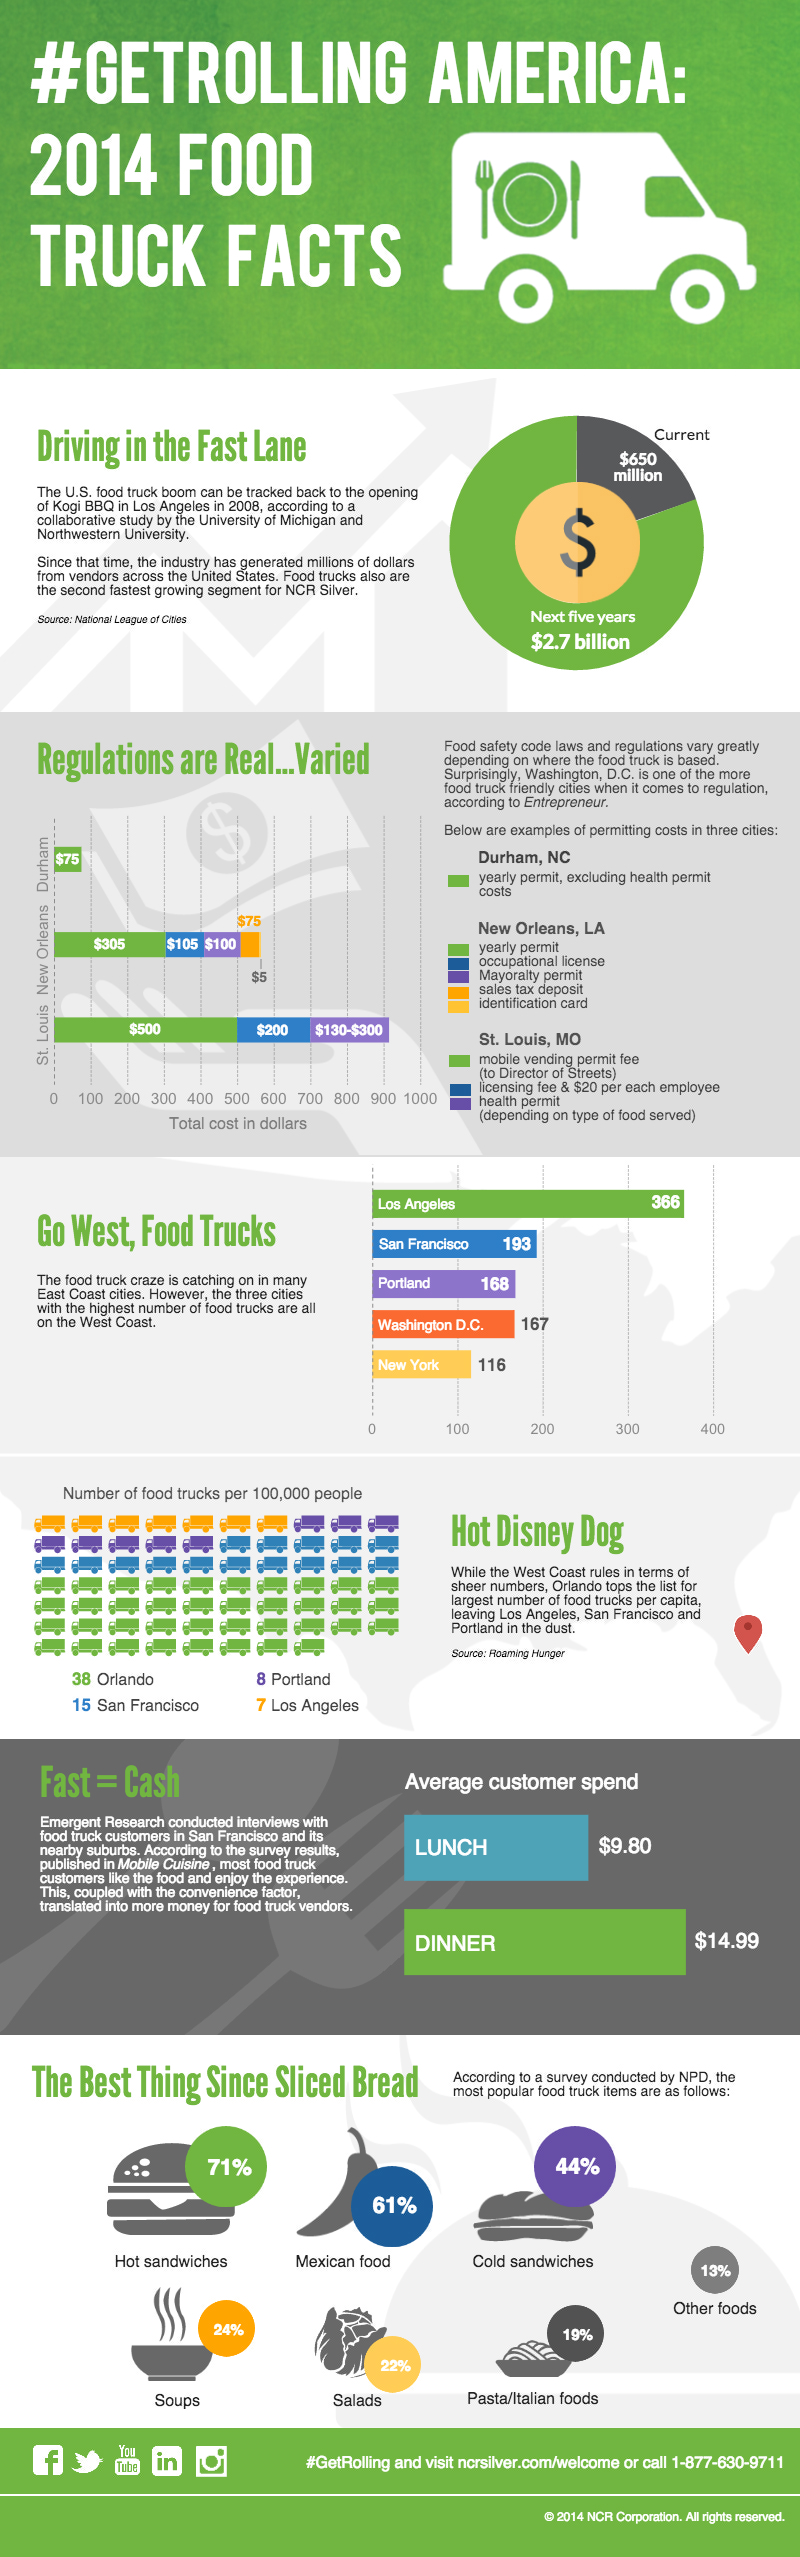 2014 Food Truck Facts